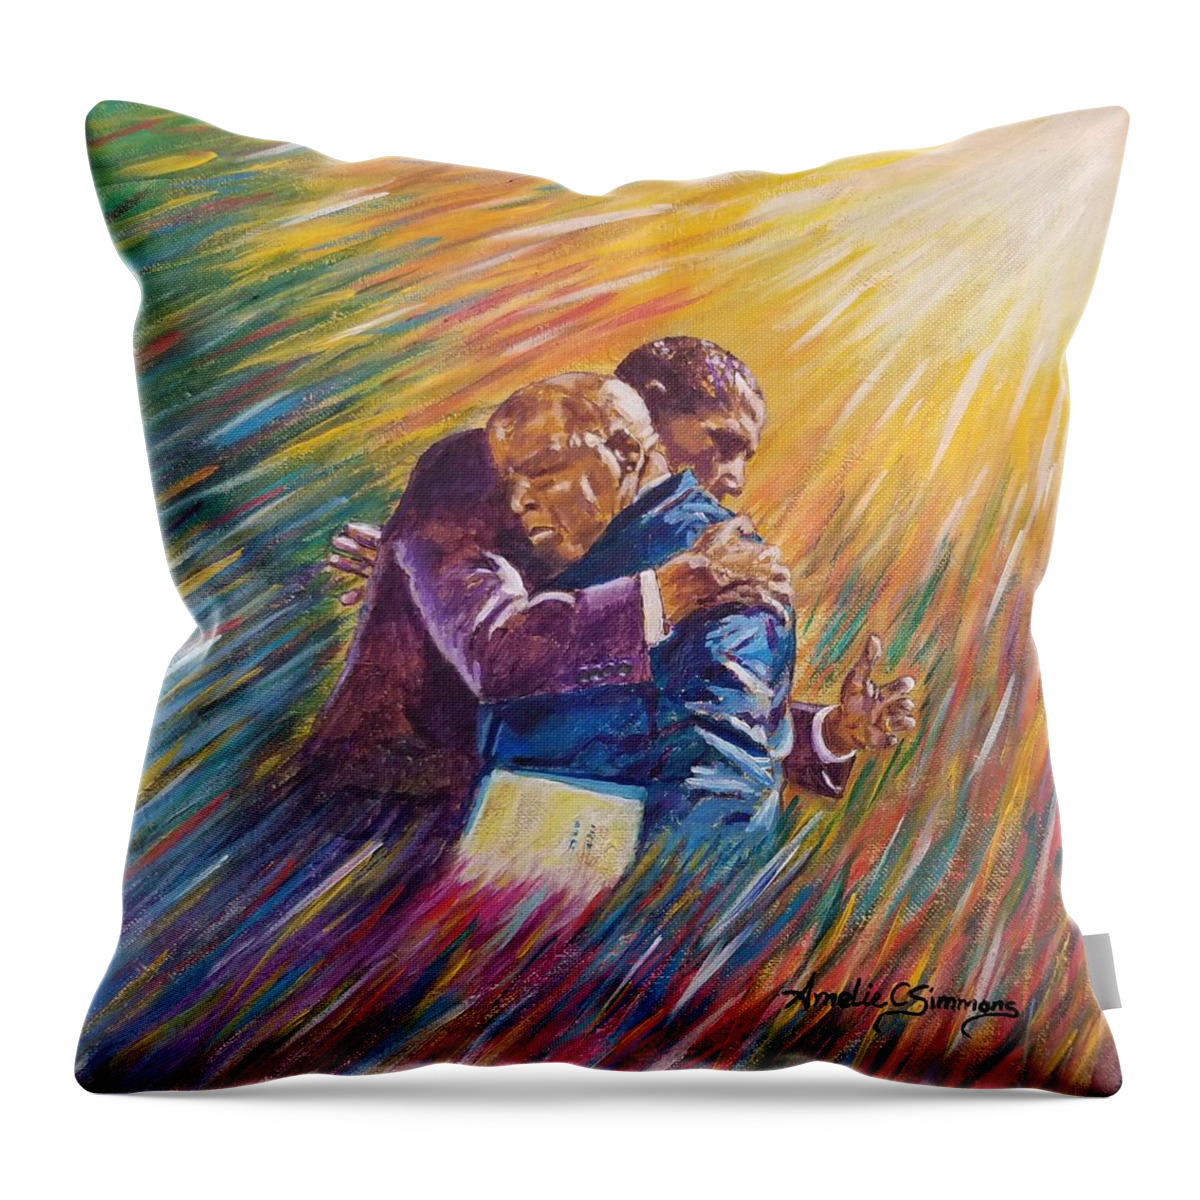 Walking With The Light Throw Pillow featuring the painting Walking With the Light by Amelie Simmons